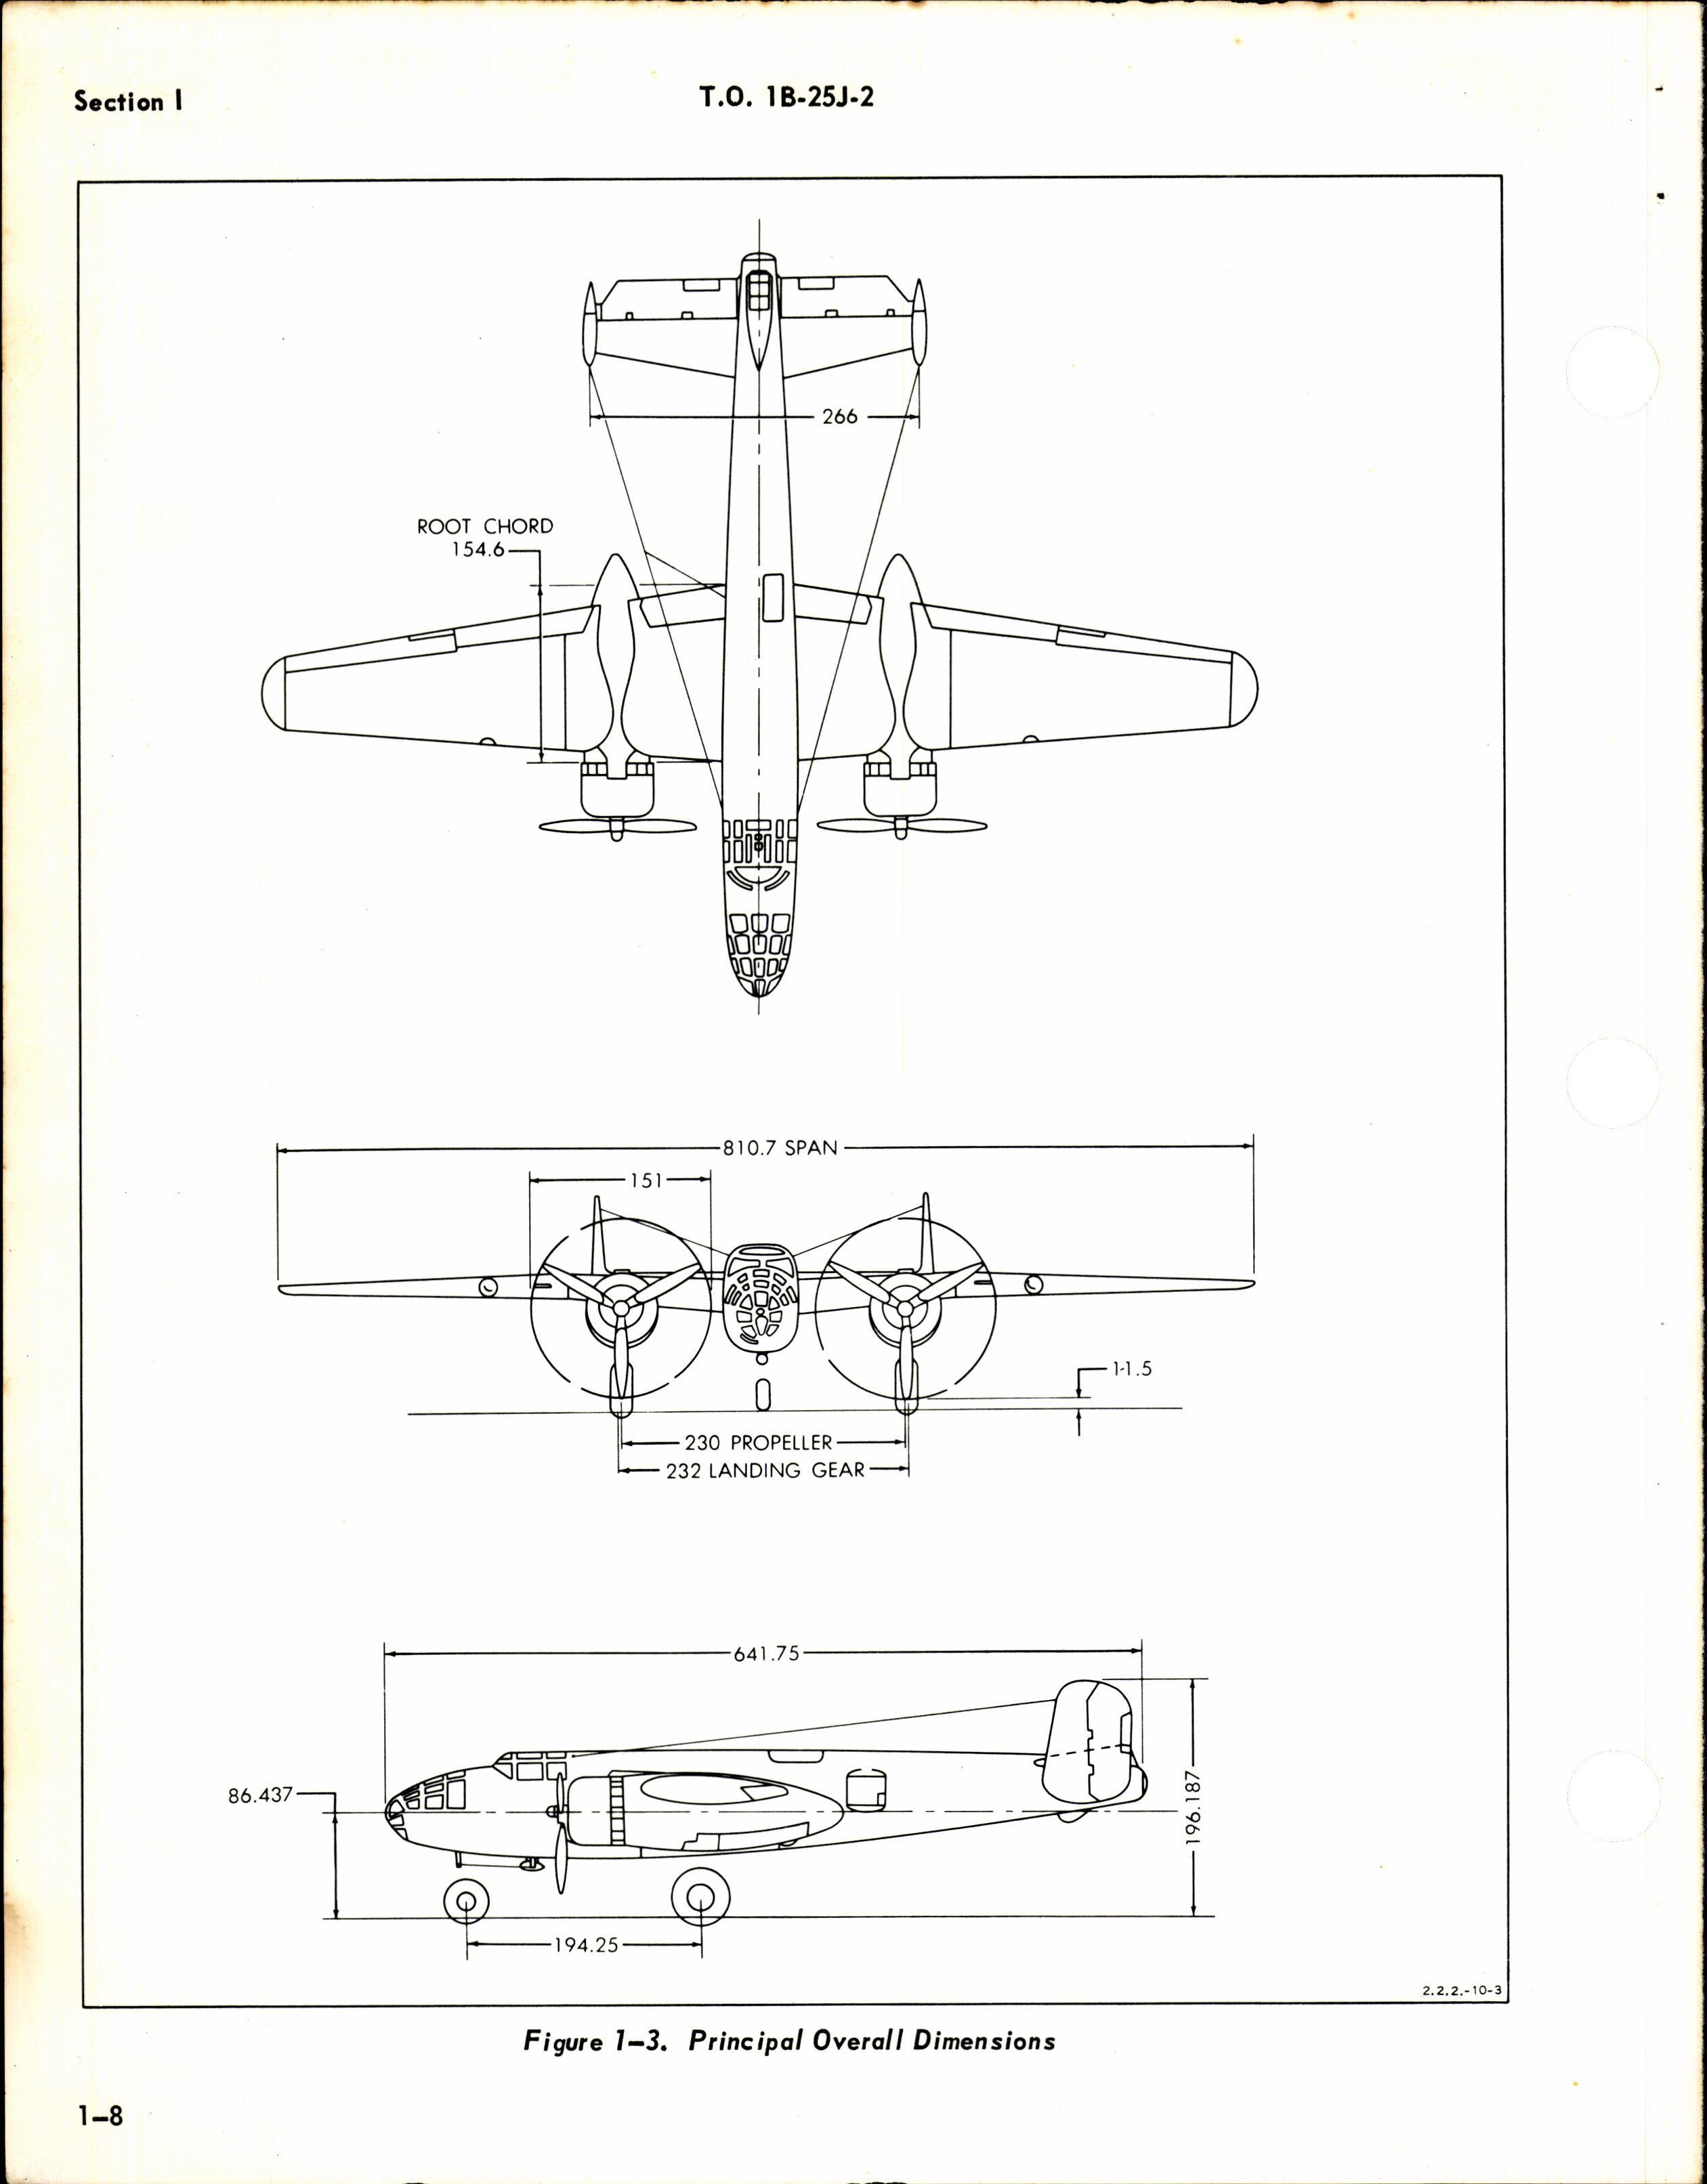 Sample page 20 from AirCorps Library document: Maintenance Instructions for B-25J, B-25L, and B-25N